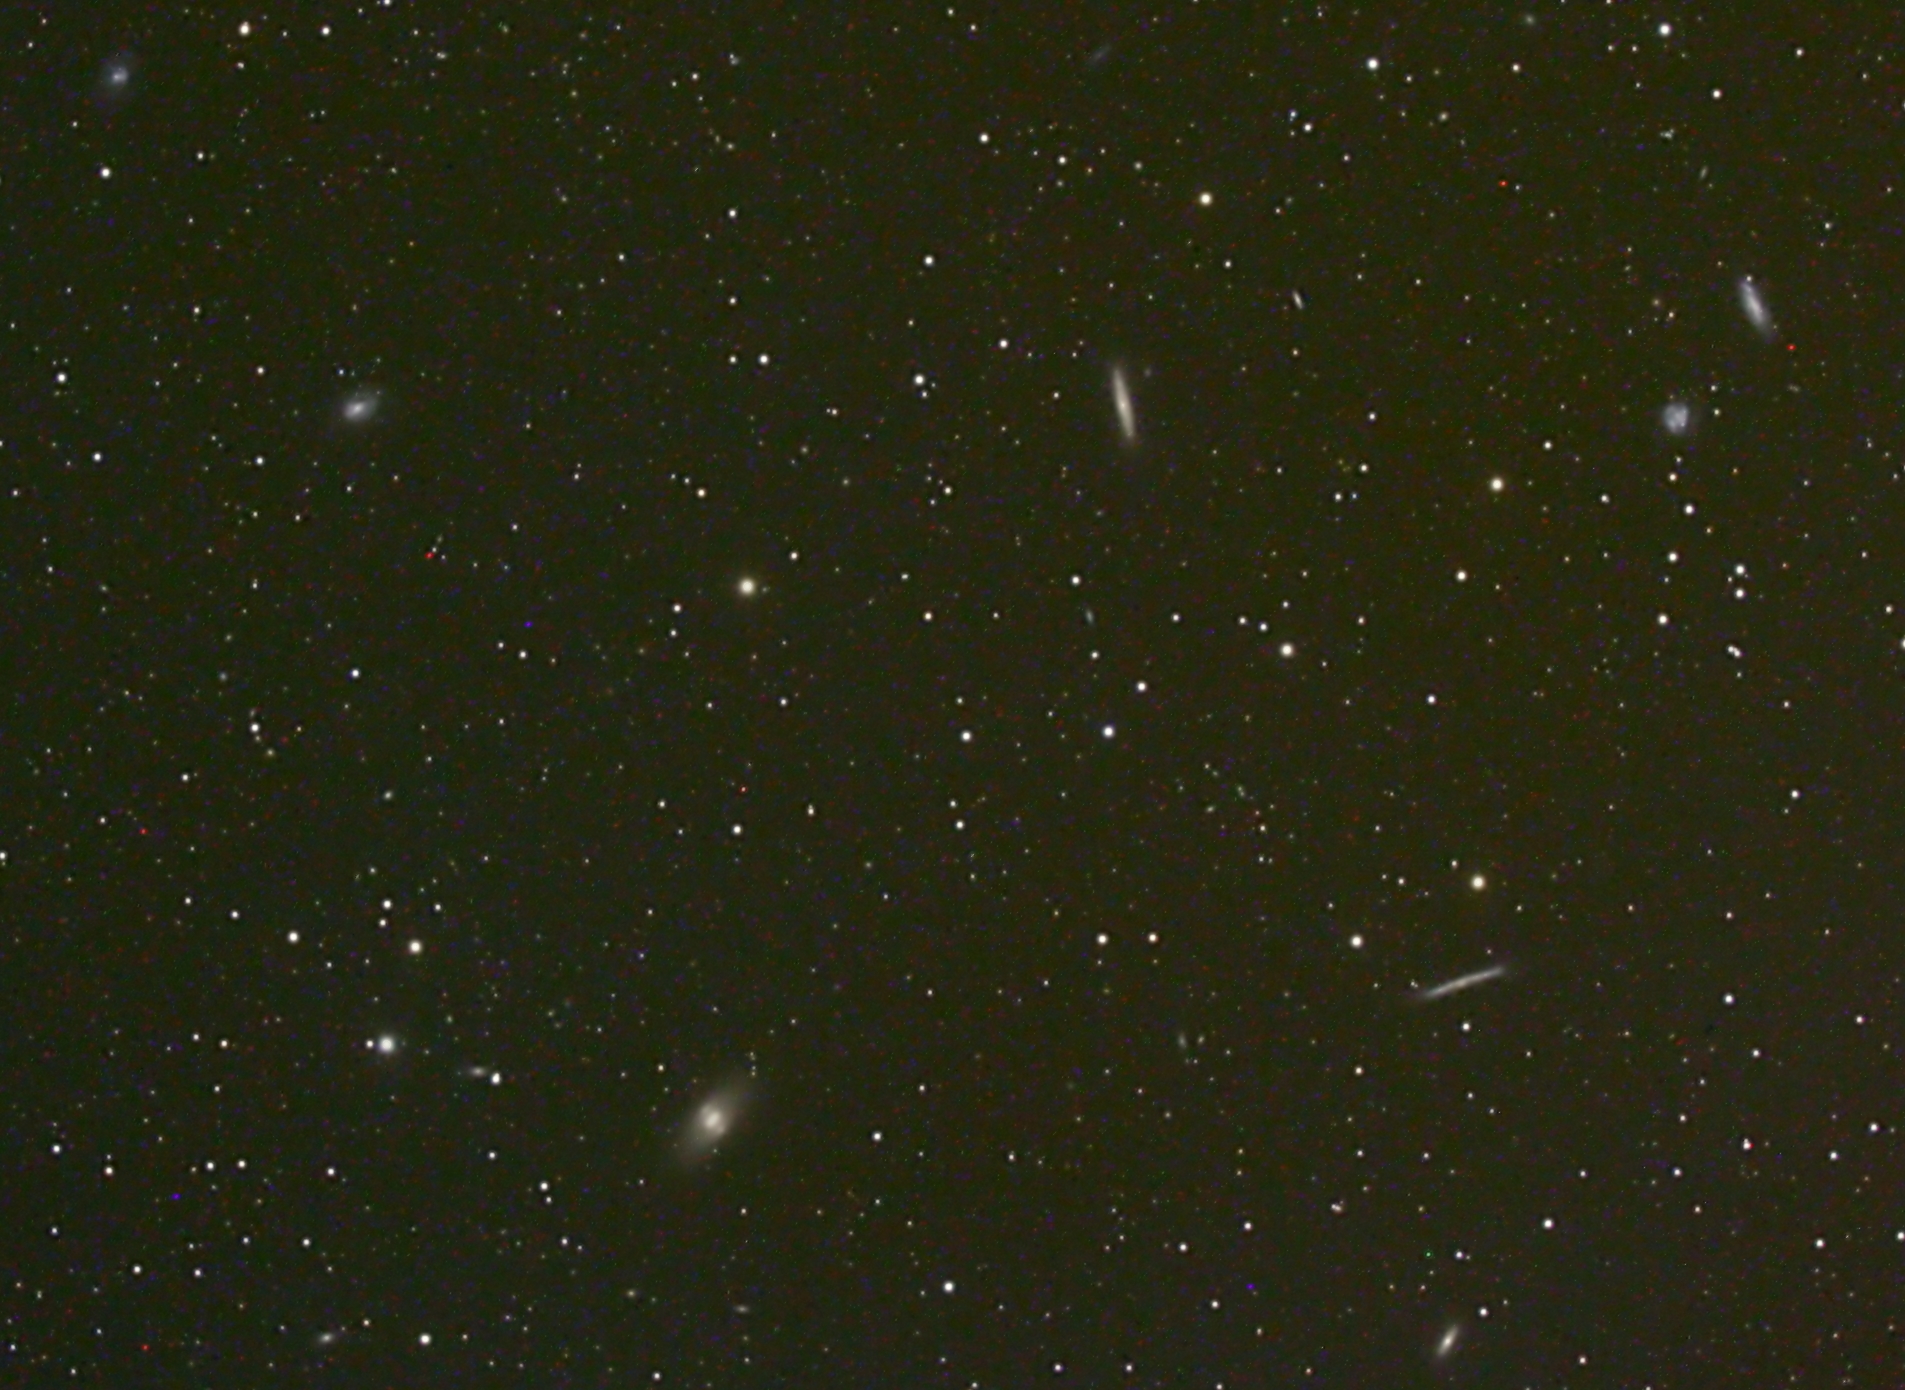  Cluster of Galaxies in Leo